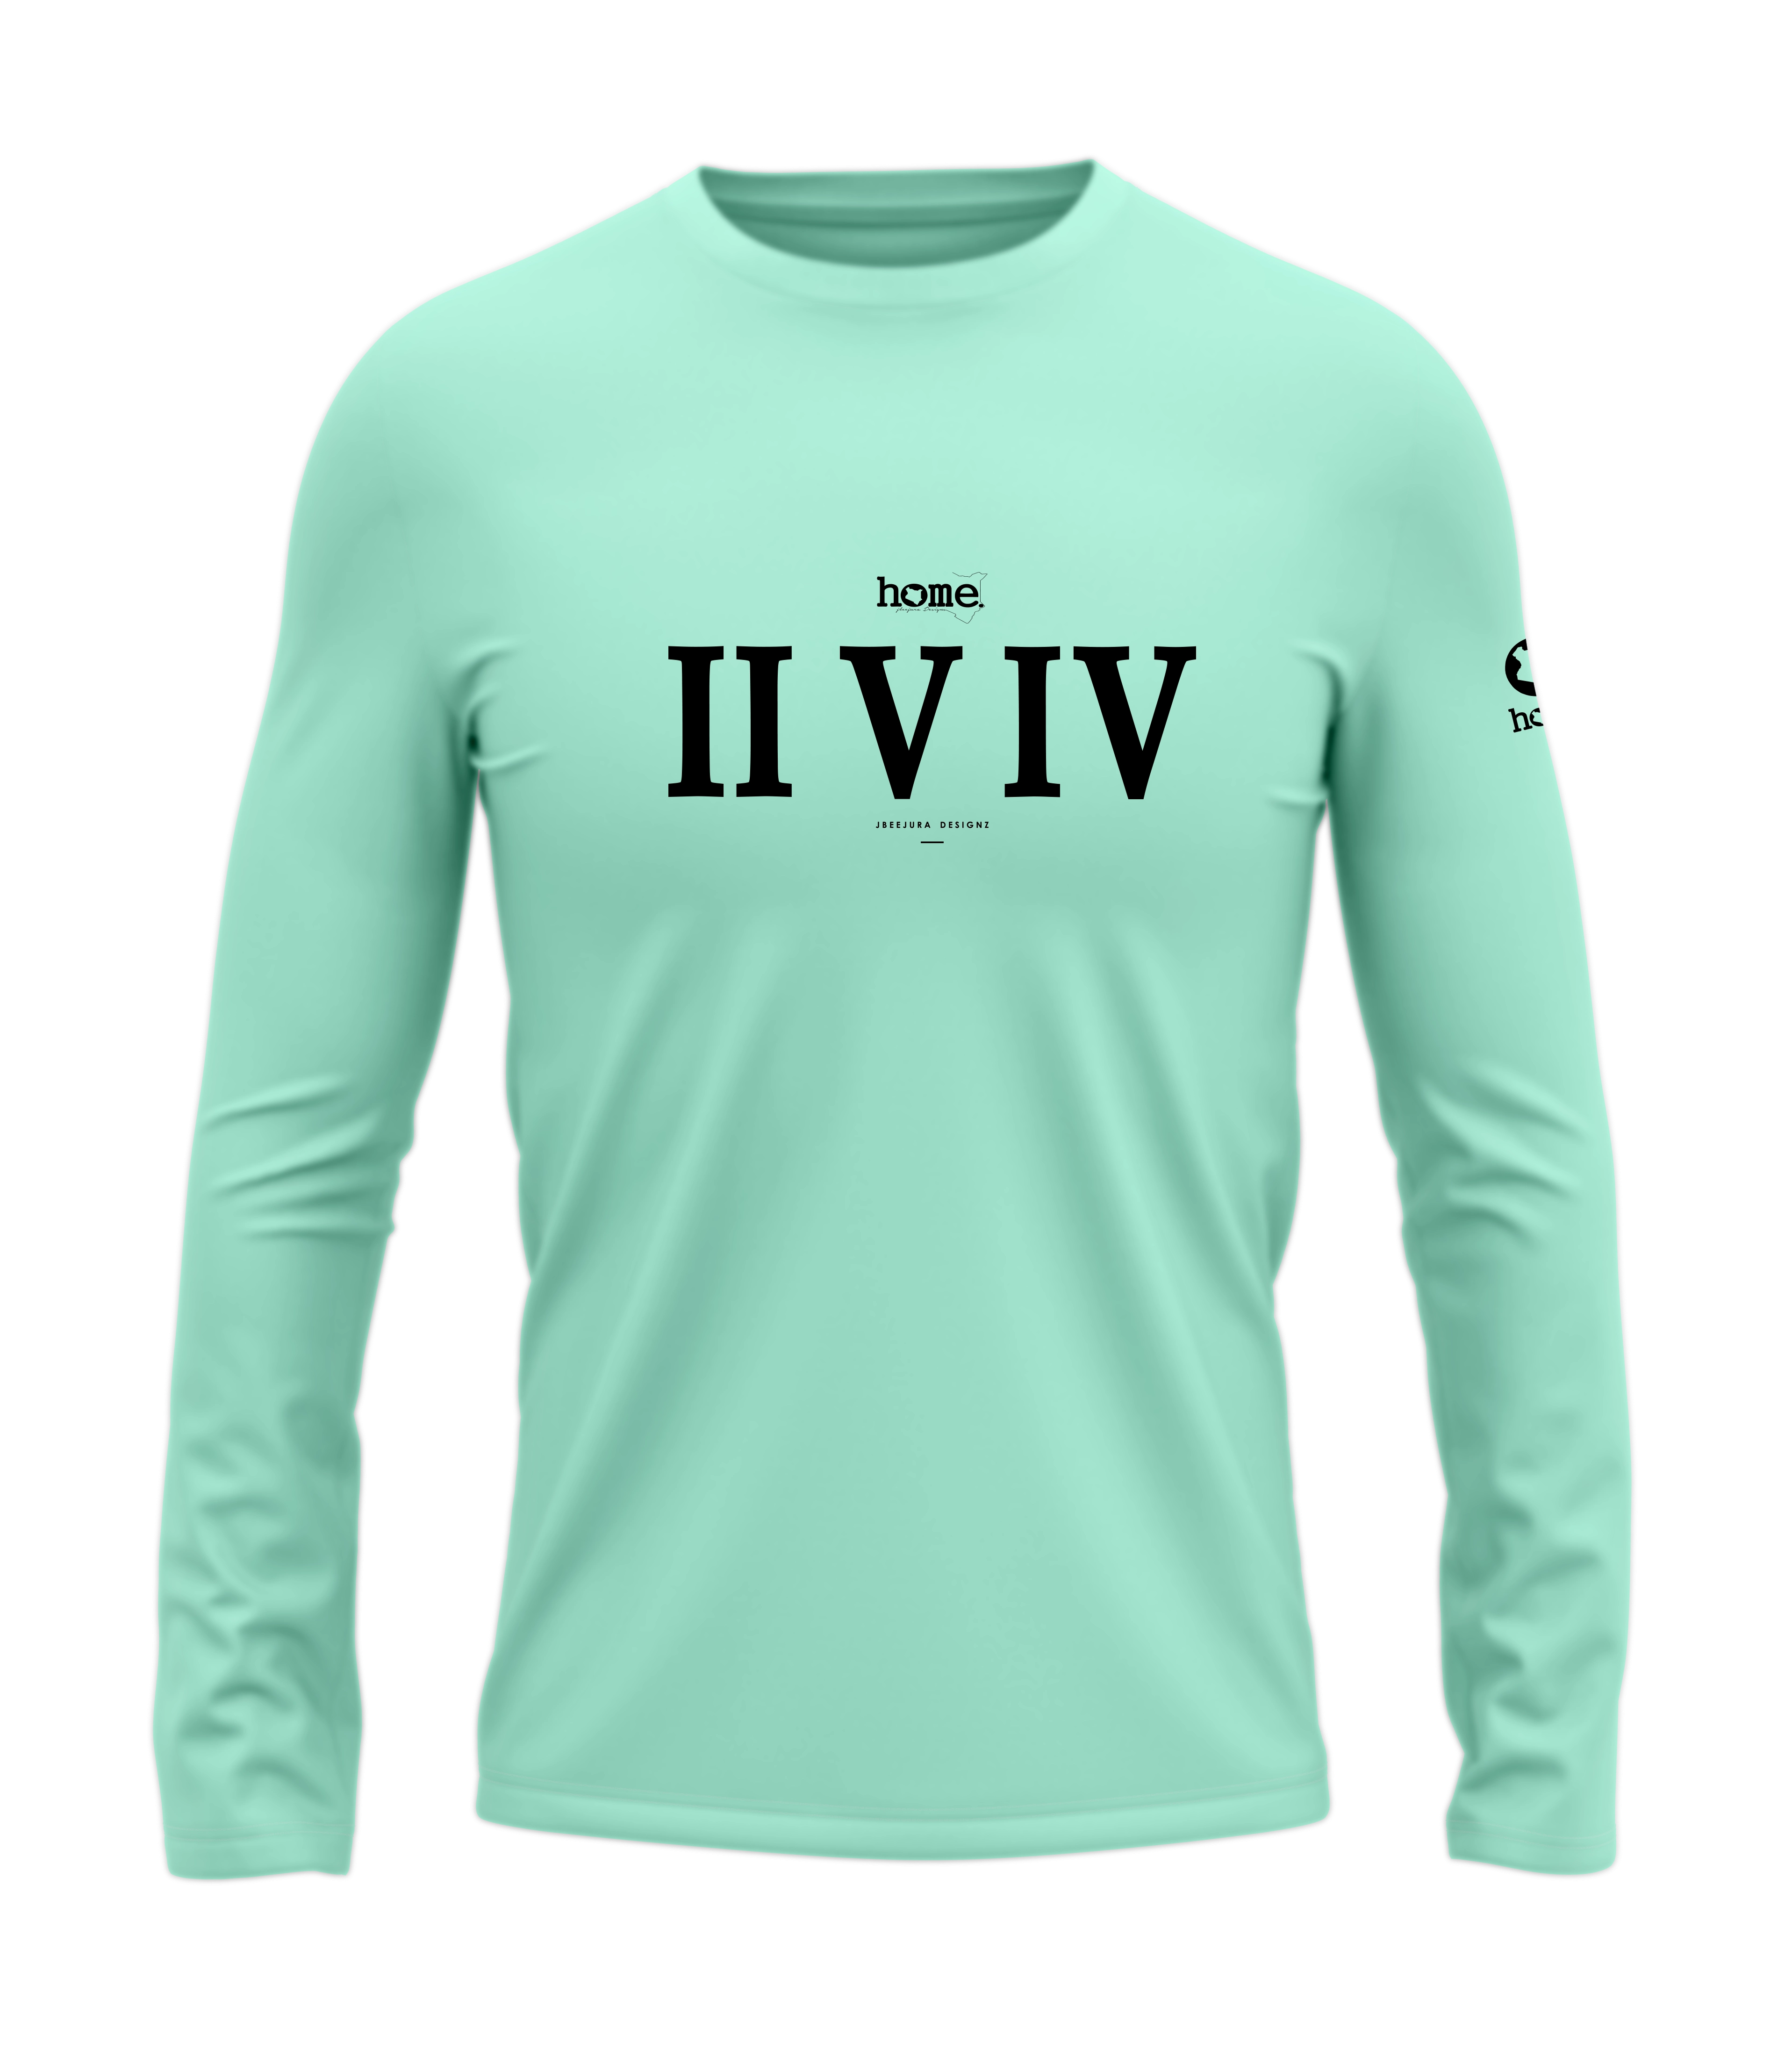 home_254 LONG-SLEEVED TURQUOISE GREEN T-SHIRT WITH A BLACK ROMAN NUMERALS PRINT – COTTON PLUS FABRIC